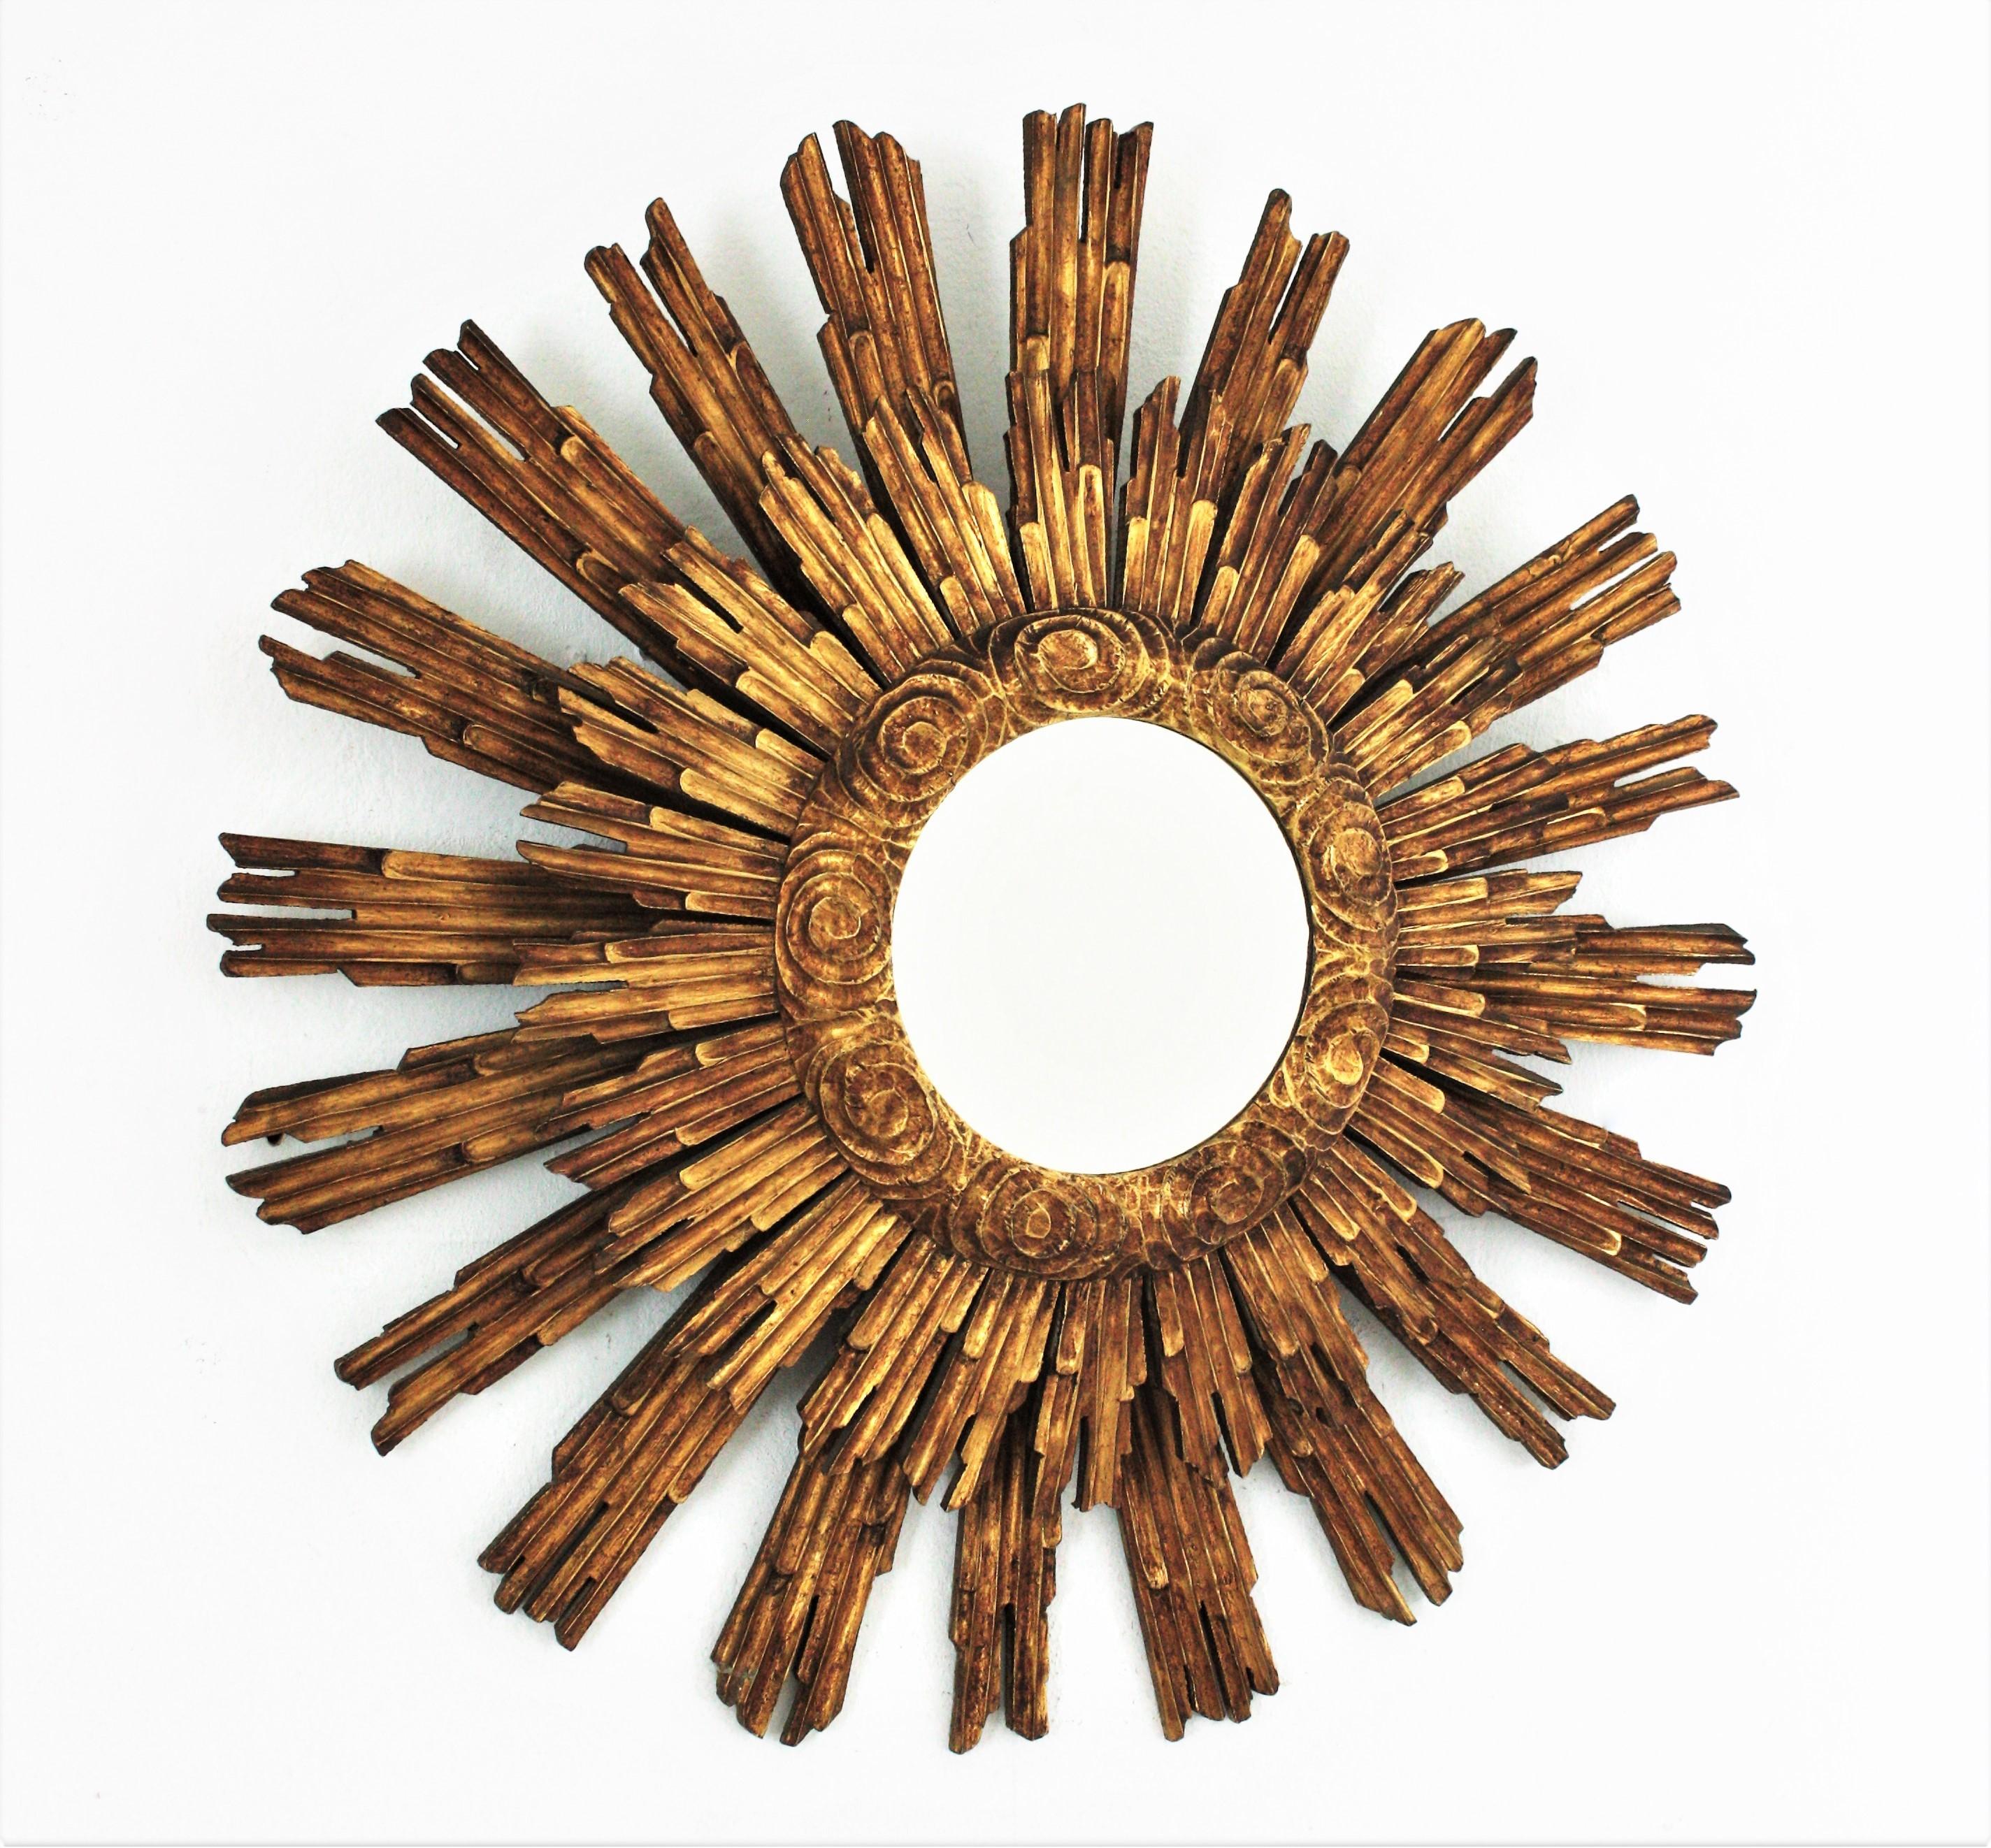 One of a Kind Hand Carved Double Layered Giltwood Sunburst Mirror. Spain, 1930s- 1940s.
This wall mirror features a carved giltwood frame made of a layer of long rays at the back part and a layer of shorter ones at the front part. The ring